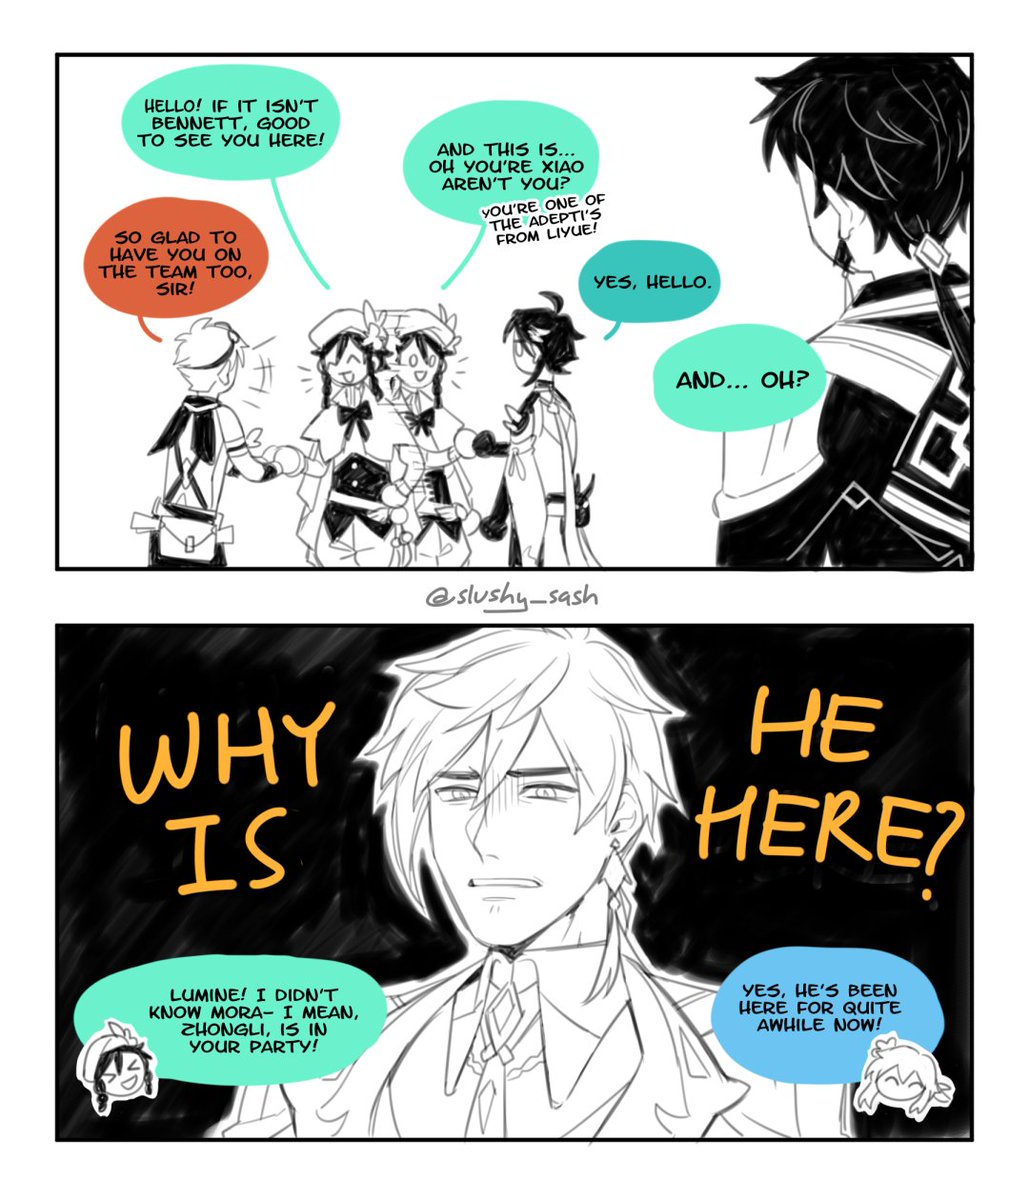 Story of how venti came home and its all thanks to jean ☺️ (forgive me zhongli) #GenshinImpact #原神 